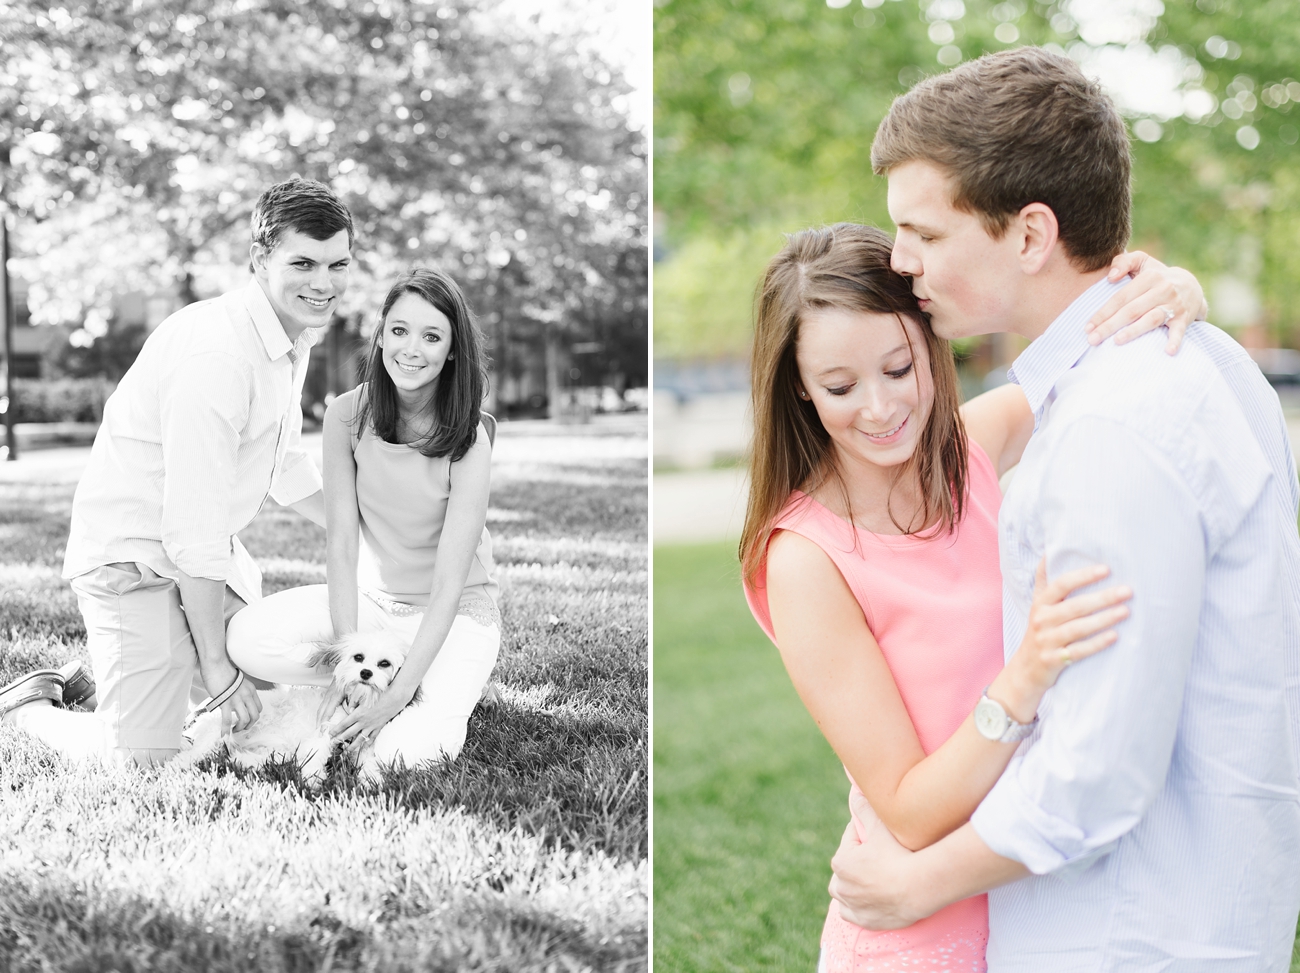 Romantic Spring Engagement Pictures in Fells Point, Baltimore | Natalie Franke Photography